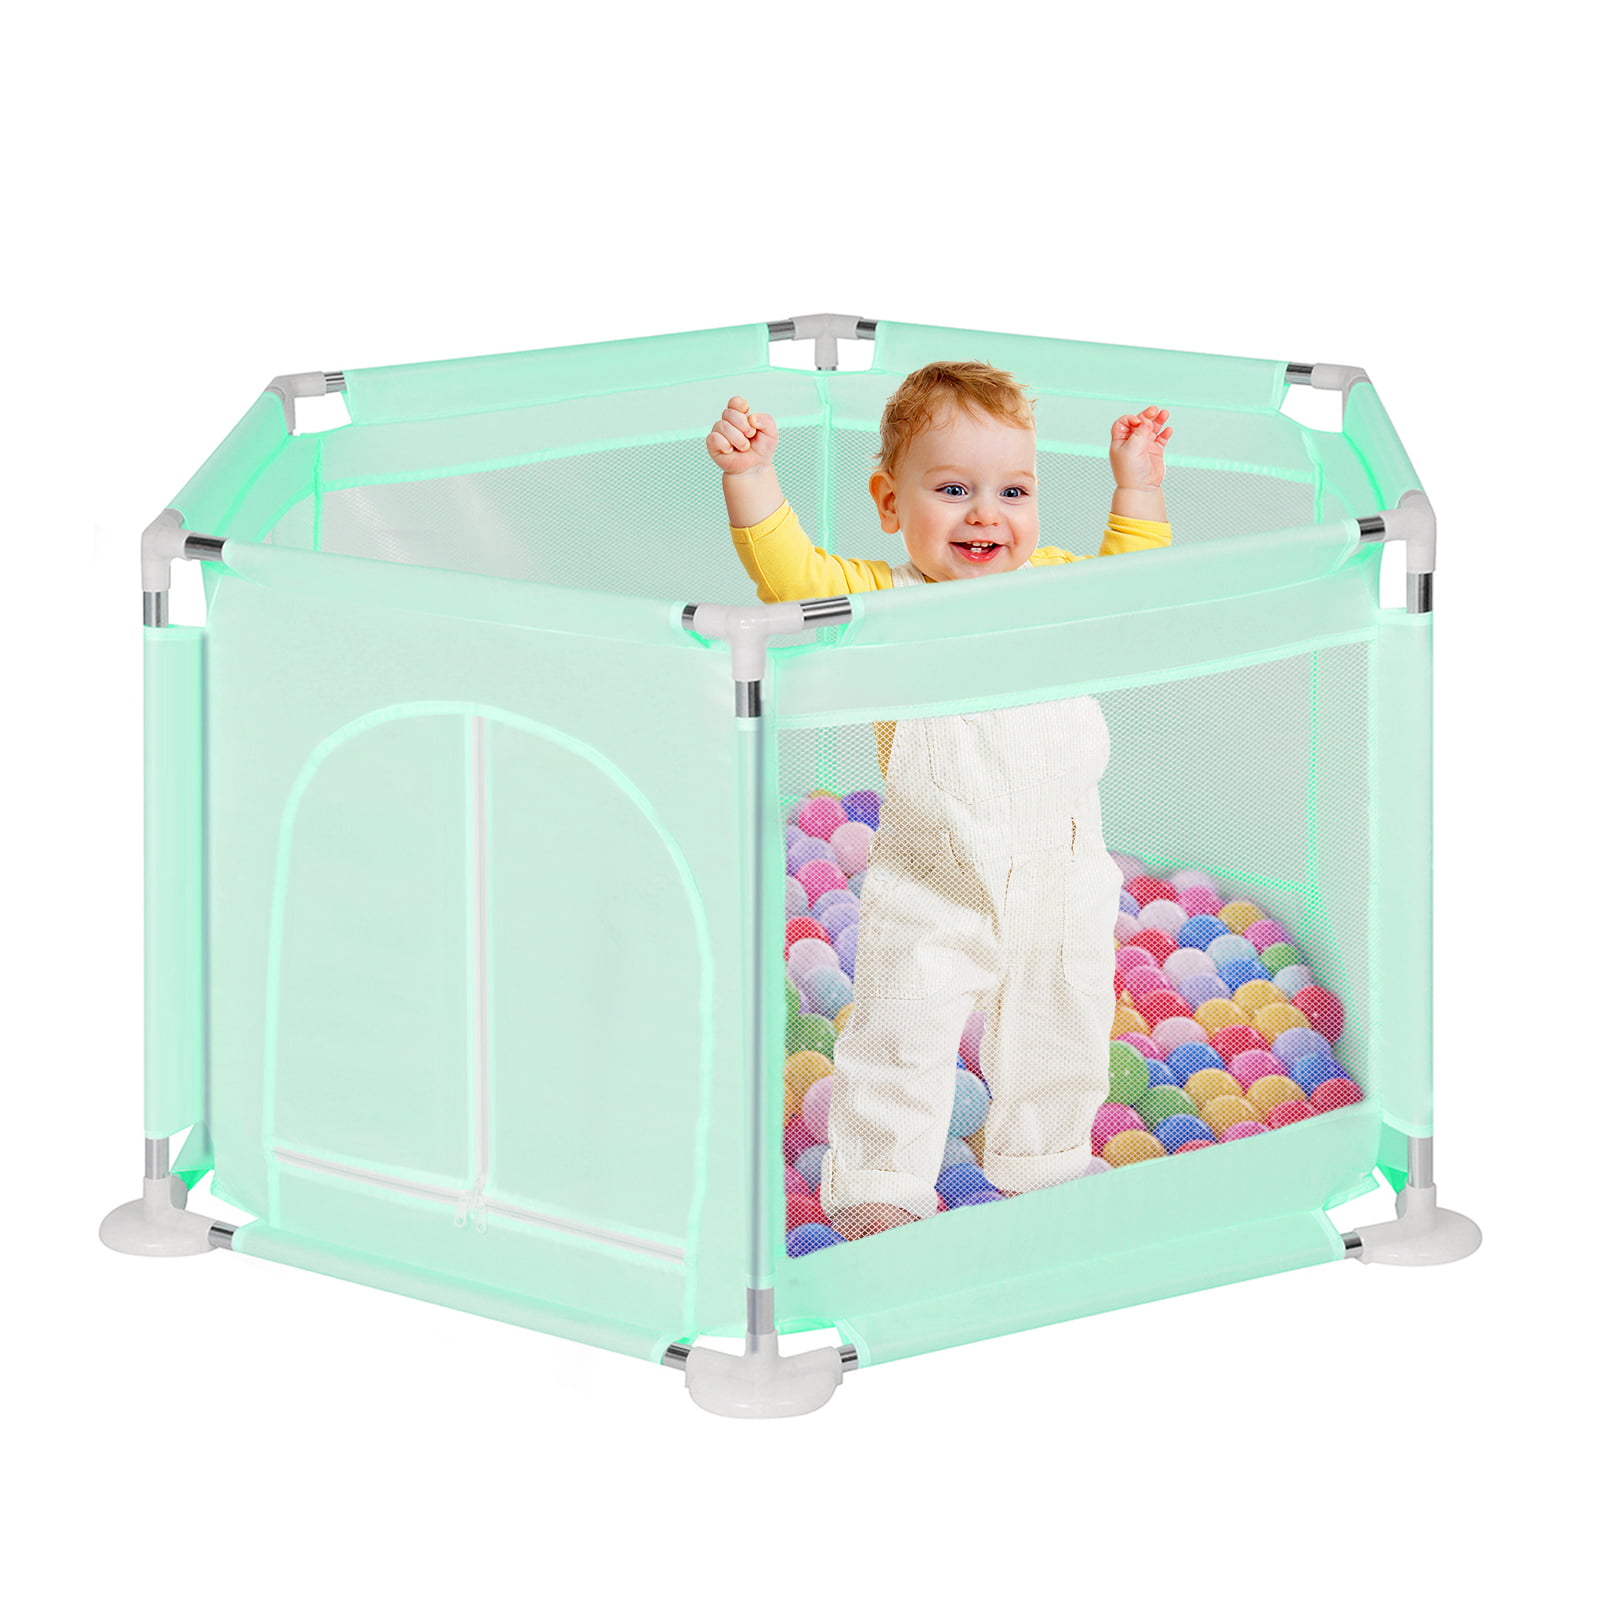 Large Foldable Plastic Baby Playpen Indoor/Outdoor Room Divider Educational Toy 